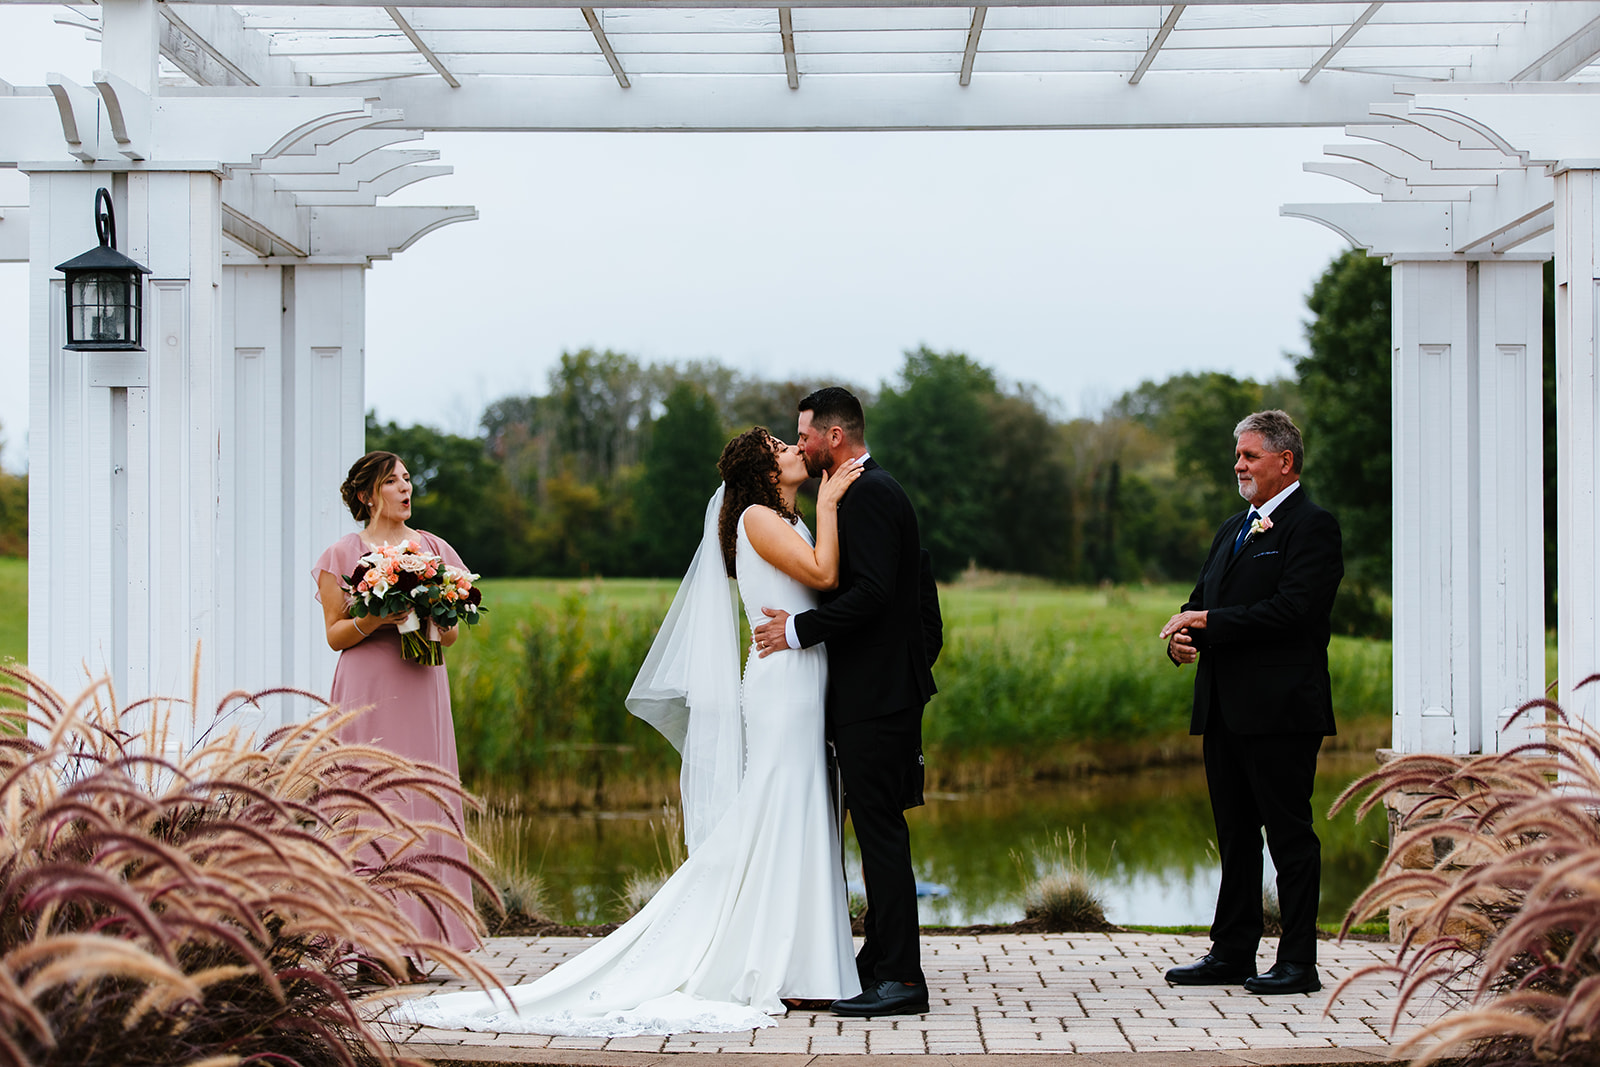 Bride and groom share a first kiss at their wedding. The wedding took place at Traditions in Syracuse, NY.